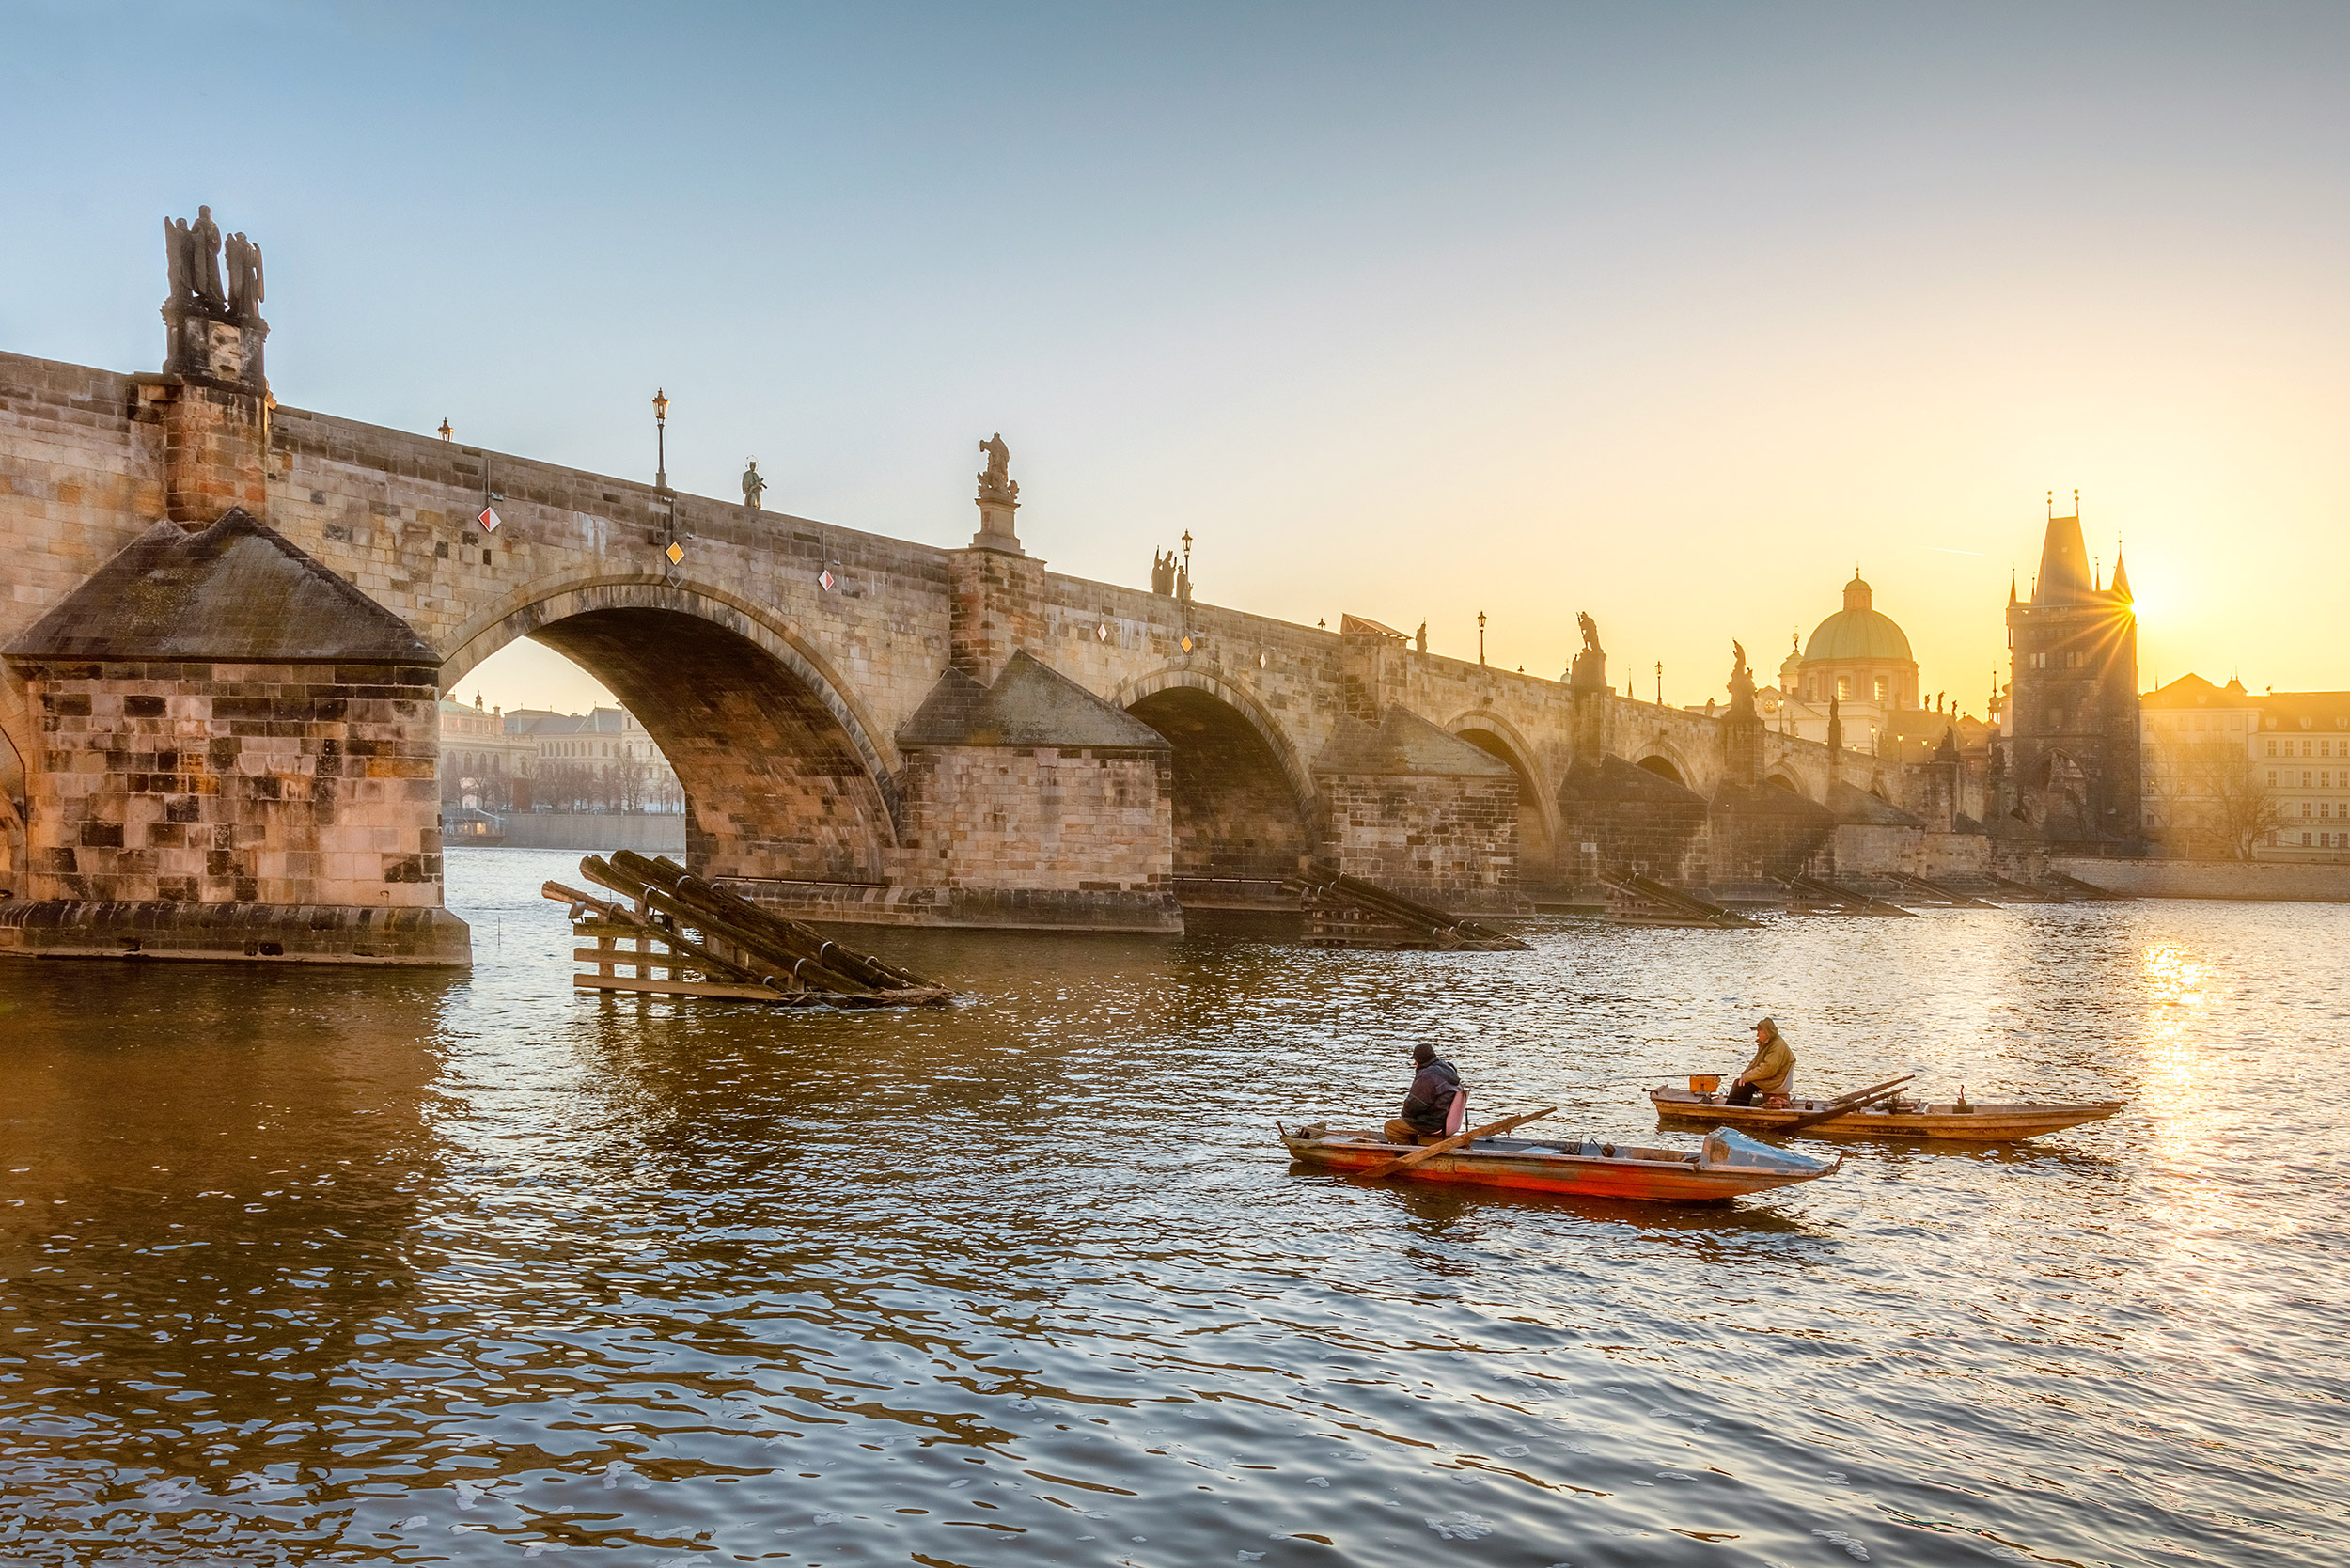 Two fishermen under the Charles bridge in Prague at the morning.